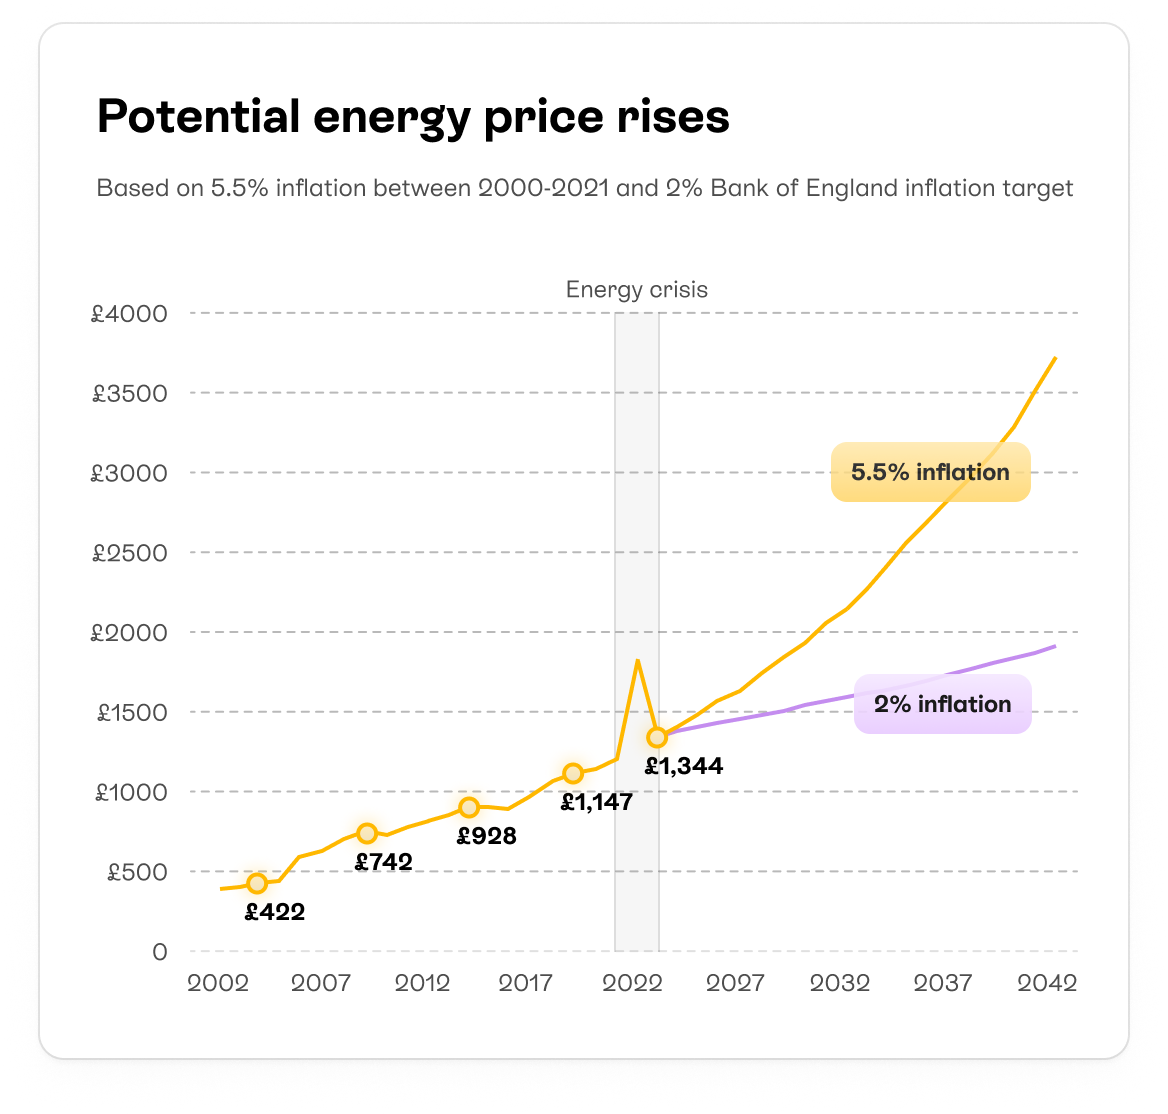 Graph showing potential energy price rises